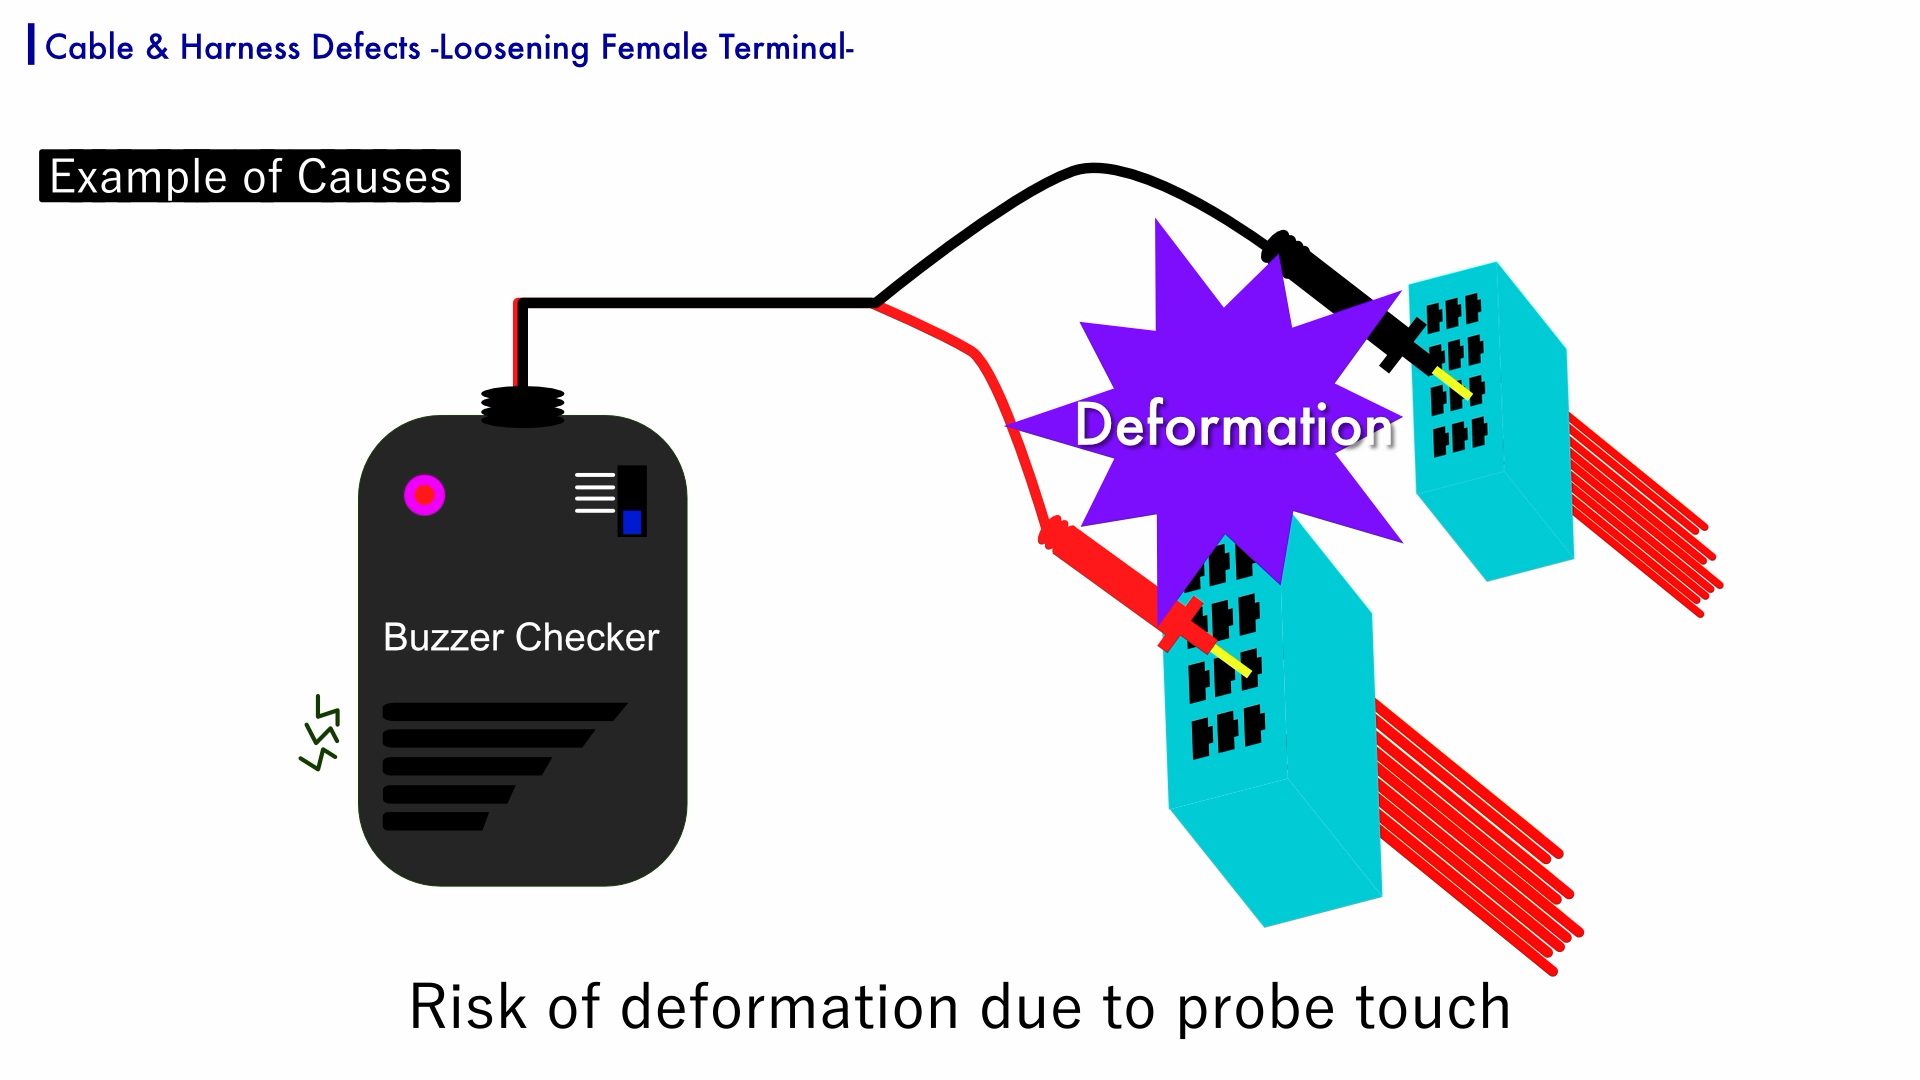 Forced-touch-with-the-probe-causes-deformation